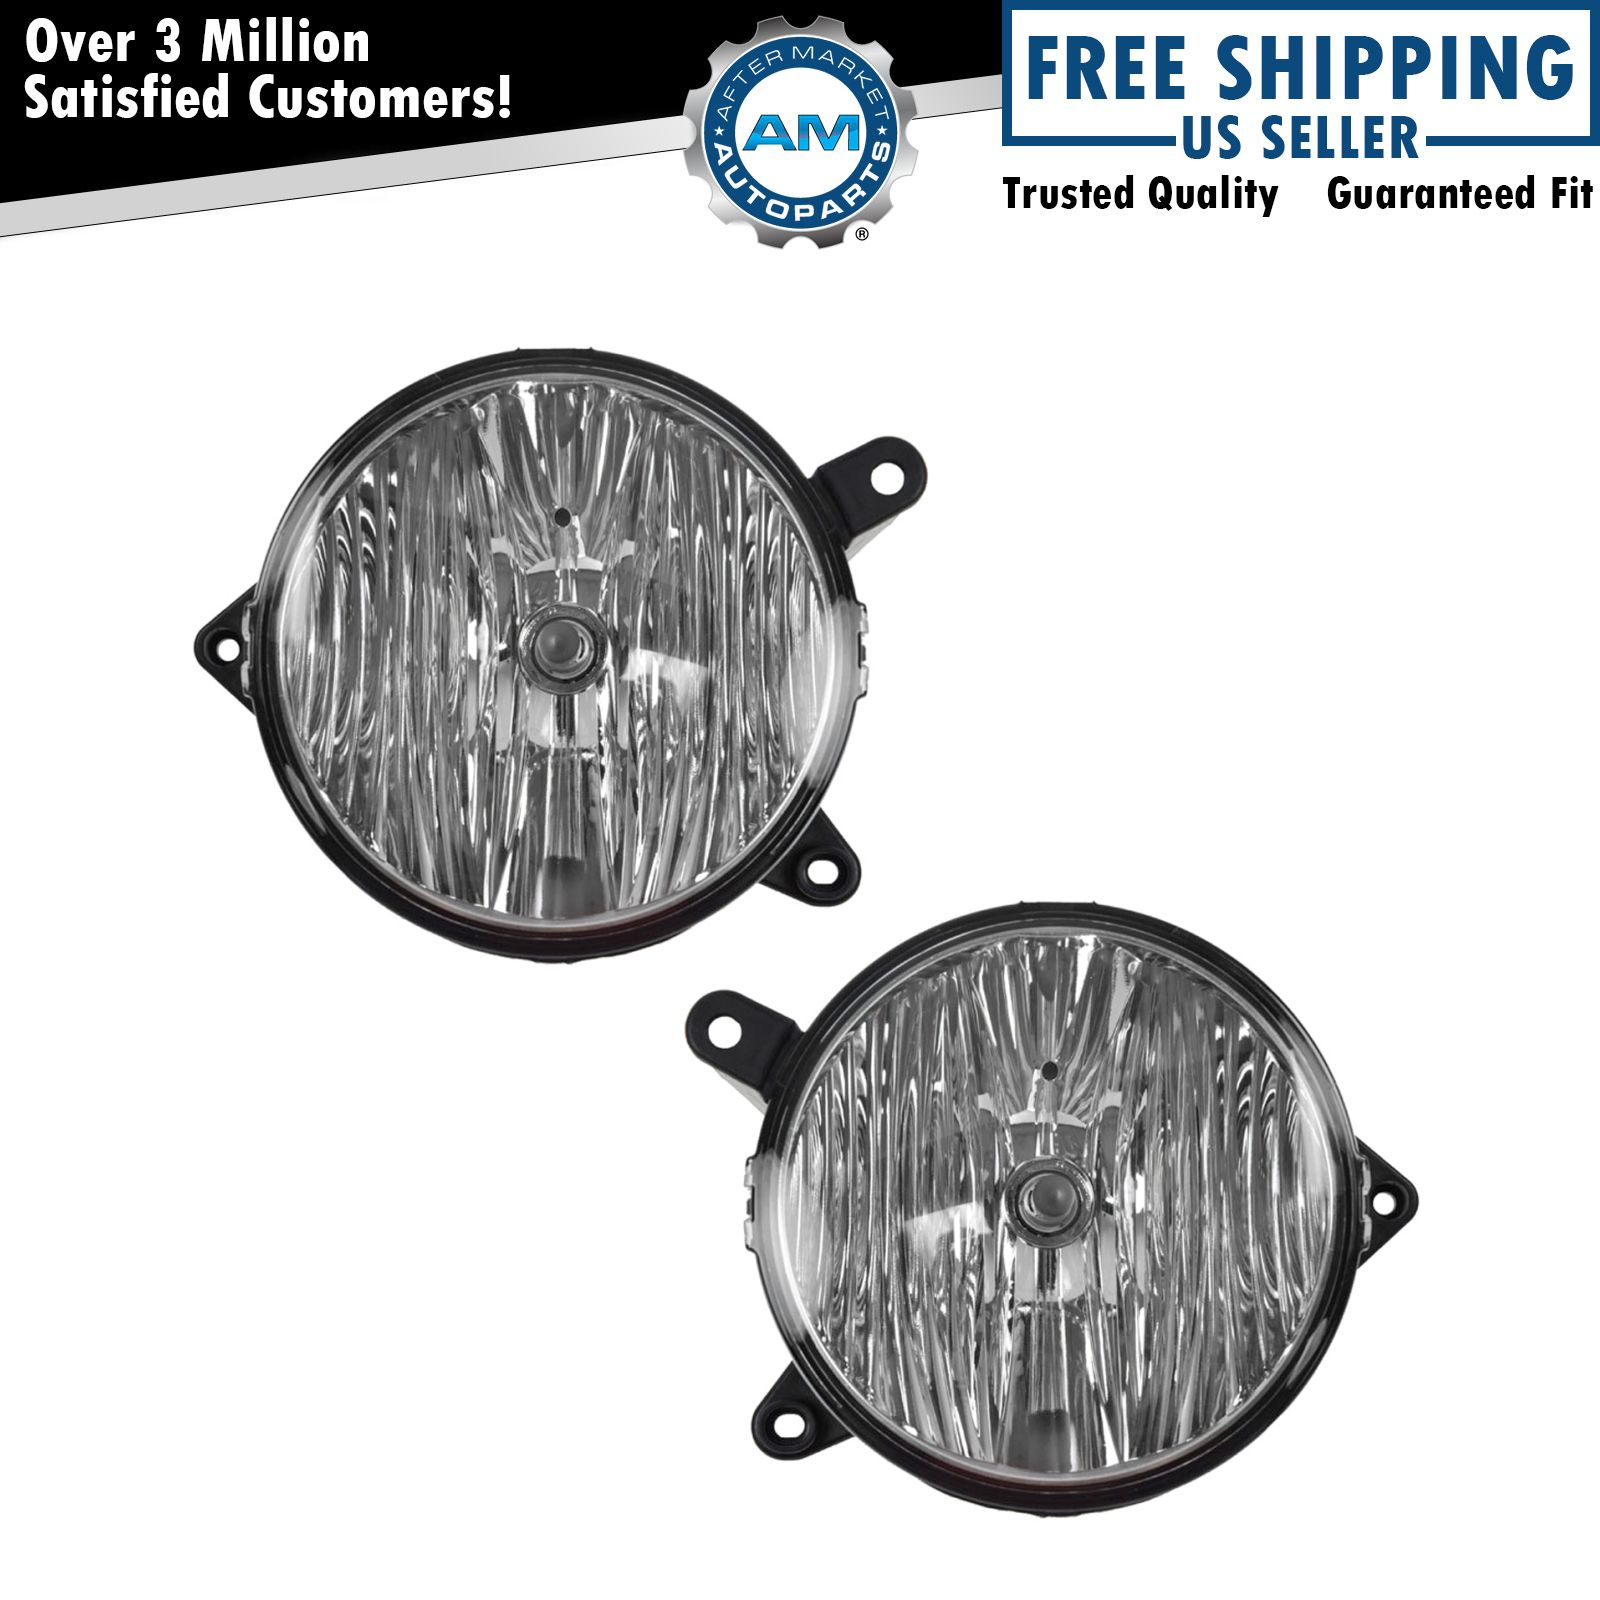 Fog Driving Light Lamp Grill Mounted Set of 2 Pair Kit for Ford Mustang GT